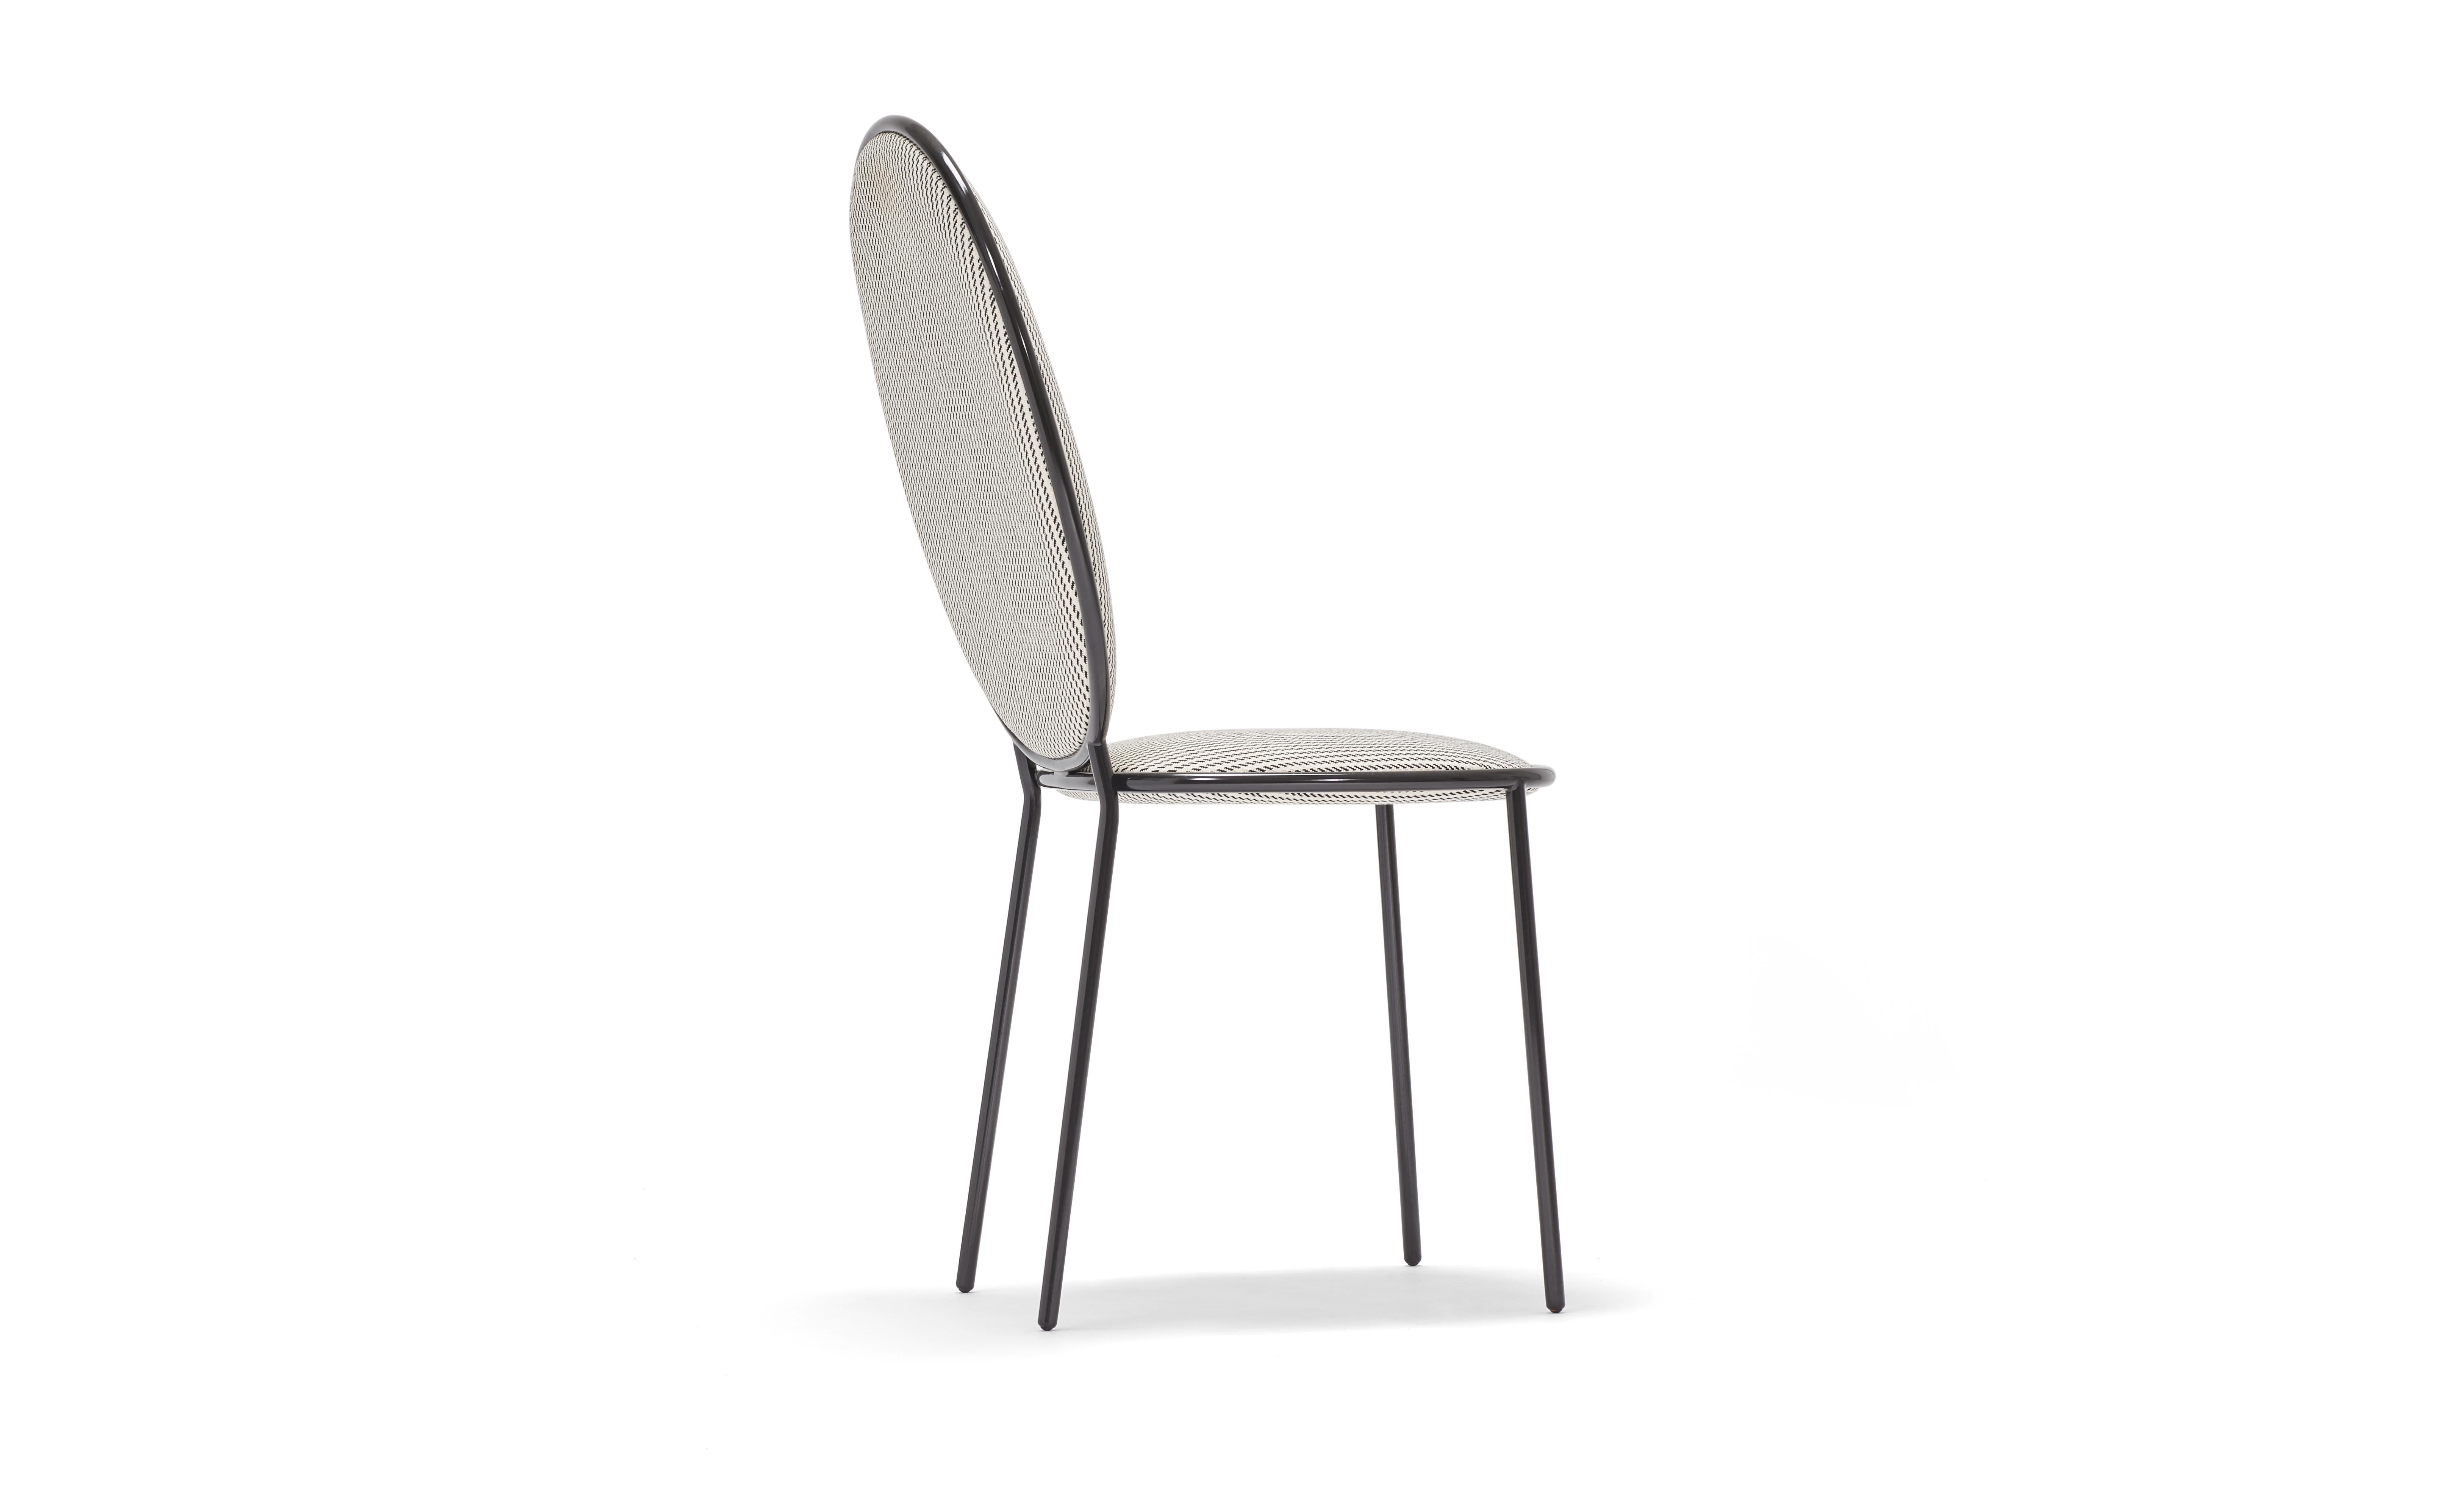 Contemporary Outdoor upholstered dining chair - Stay by Nika Zupanc

The Stay Family turns everyday seating into a special occasion. The Dining Chair and Dining Armchair are variations on an elegant social theme whilst the Dining Table adds a